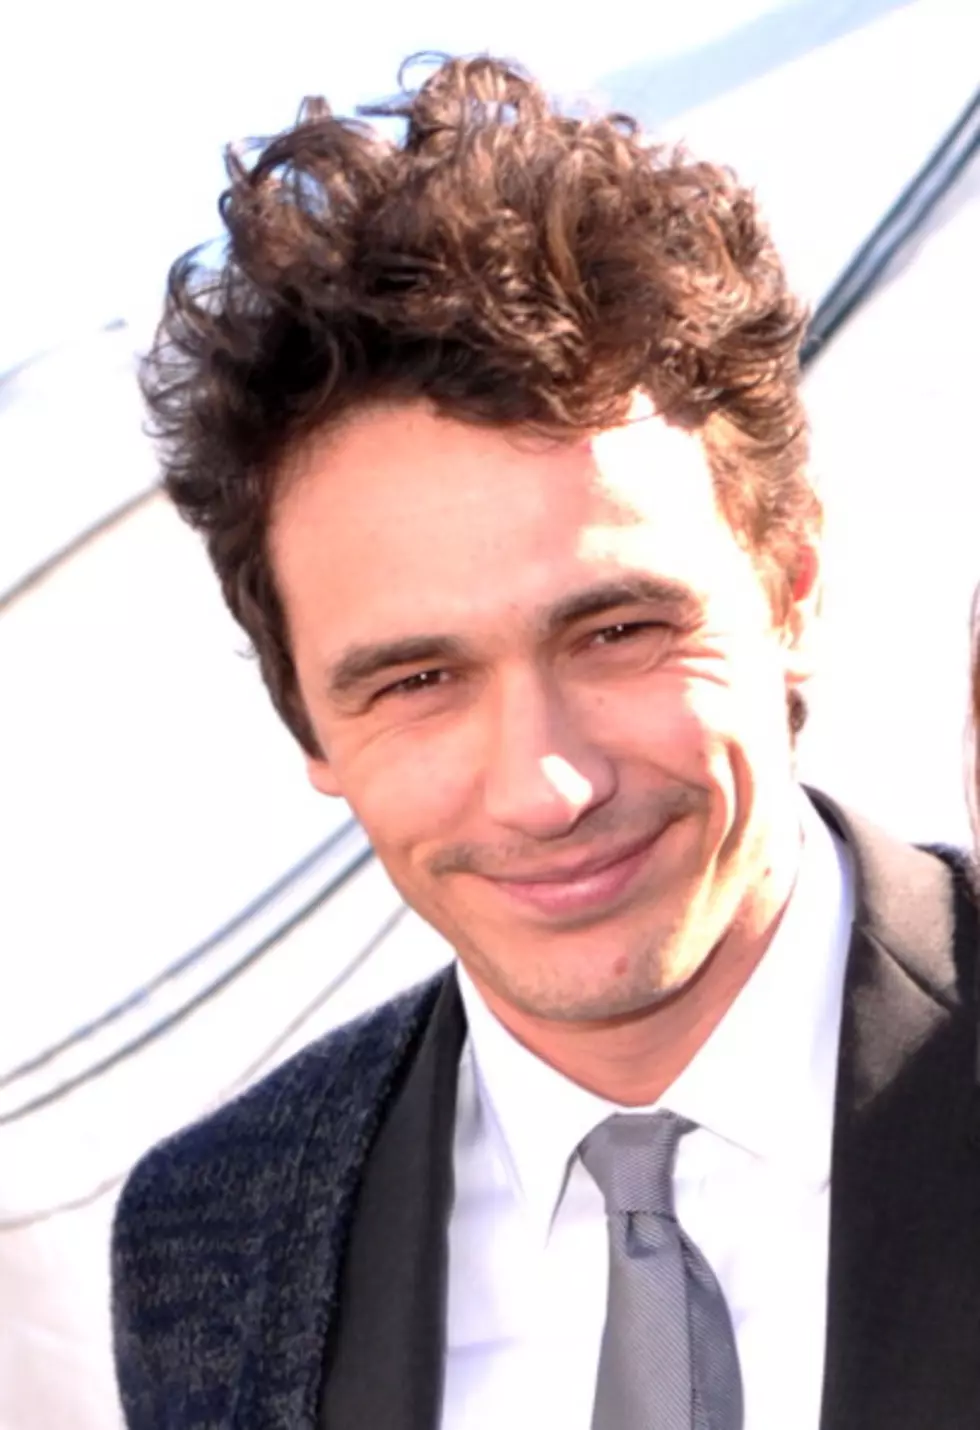 NYU Professor Claims He Was Fired For Giving James Franco A ‘D’